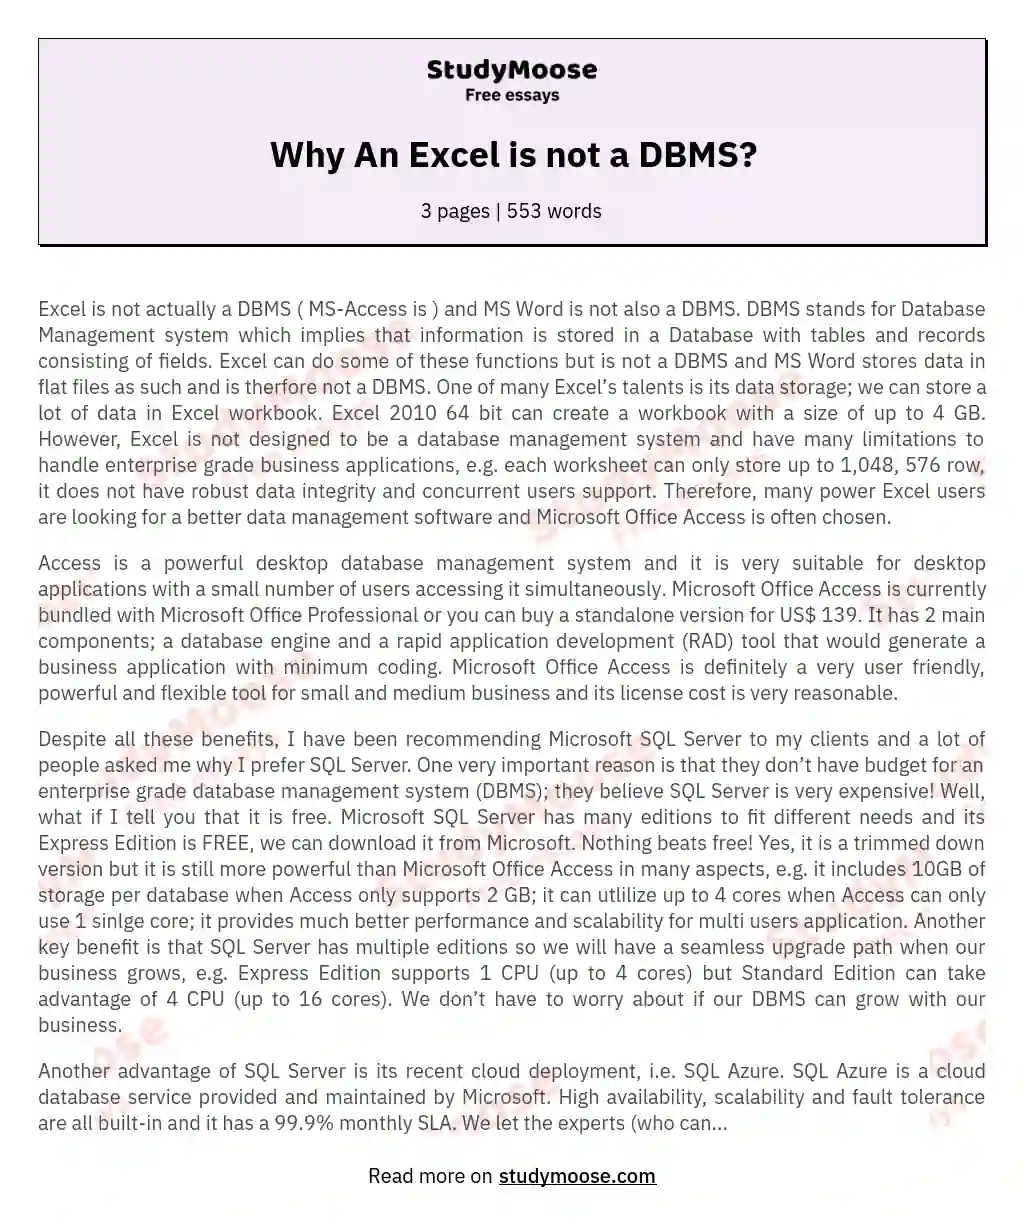 Why An Excel is not a DBMS? essay